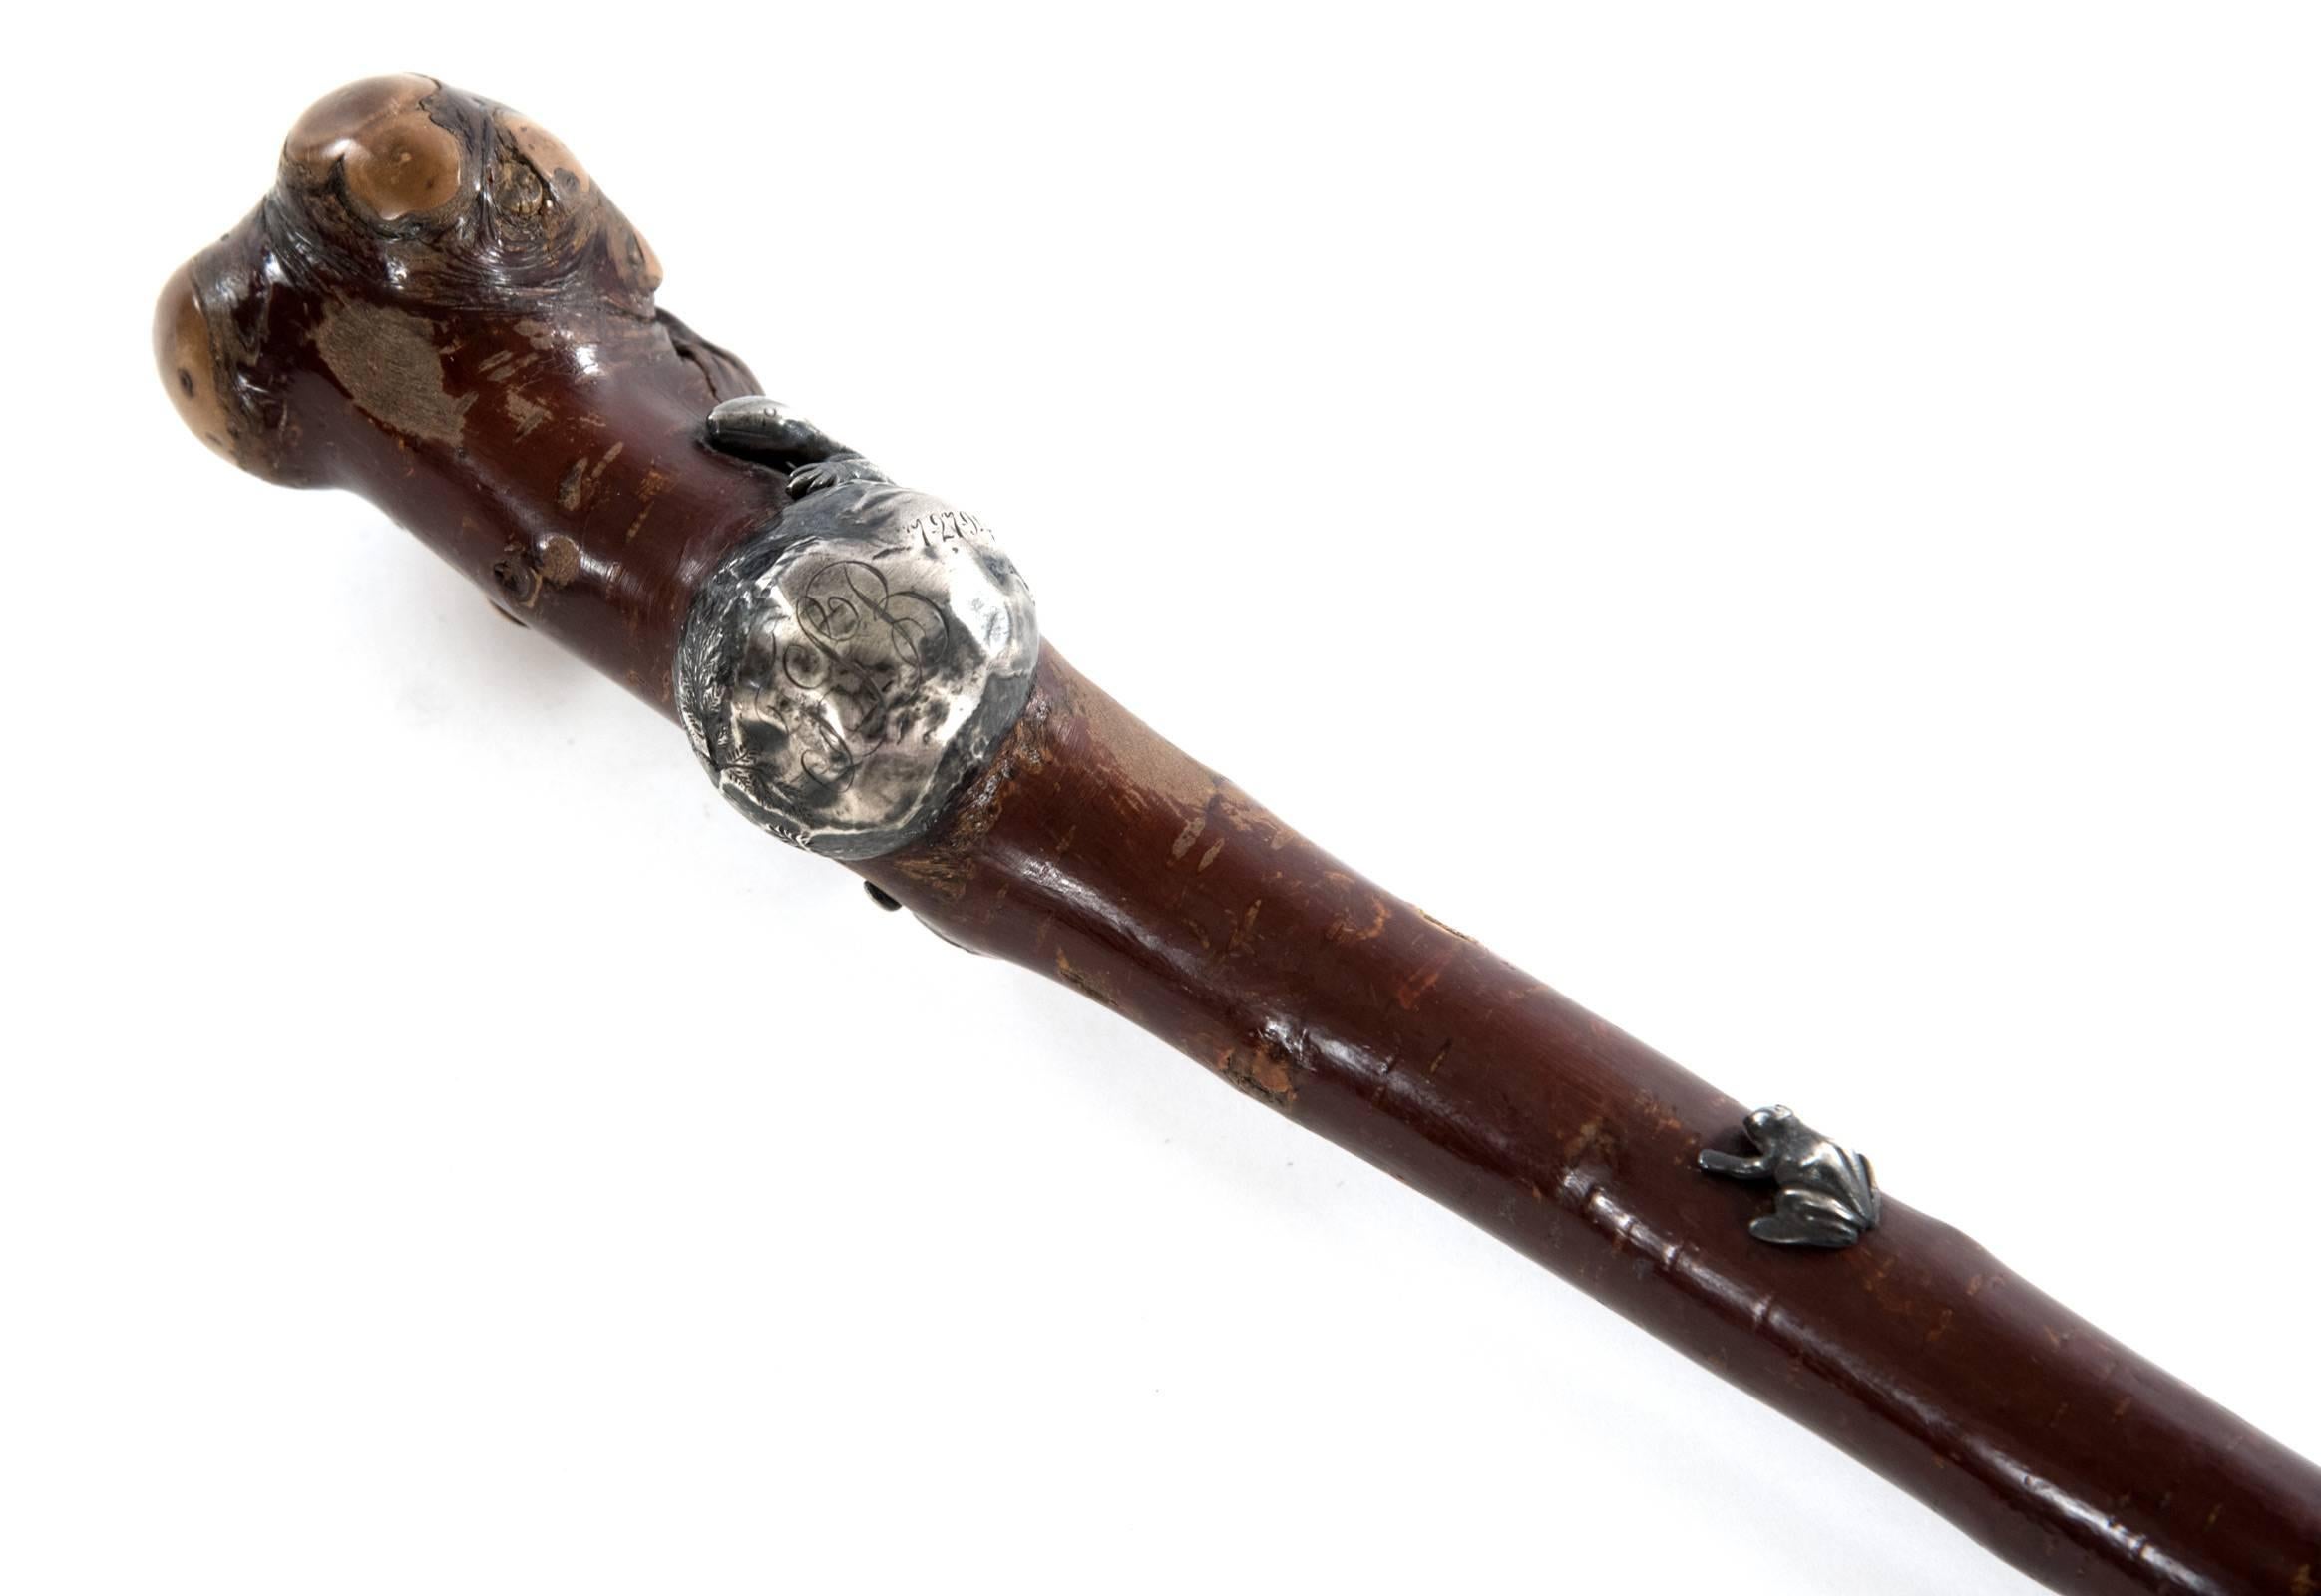 A walking stick with the gnarled, organic attributes of the wood itself giving character to the piece. A silver collar, with a lizard element, is engraved with the initials and the date 